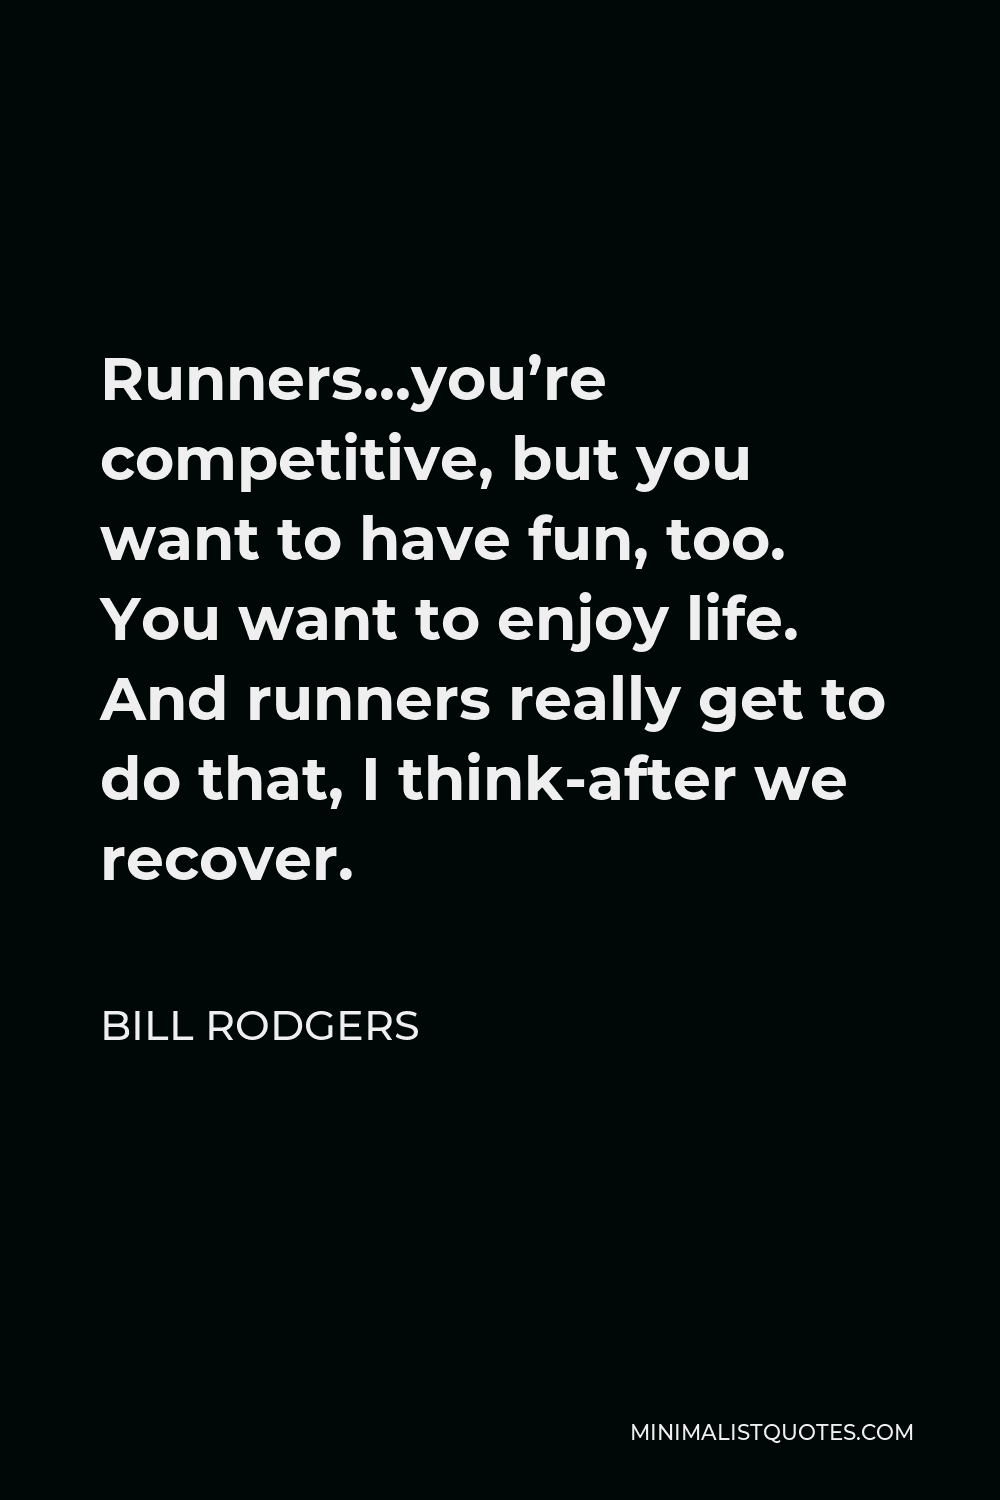 Bill Rodgers Quote - Runners…you’re competitive, but you want to have fun, too. You want to enjoy life. And runners really get to do that, I think-after we recover.